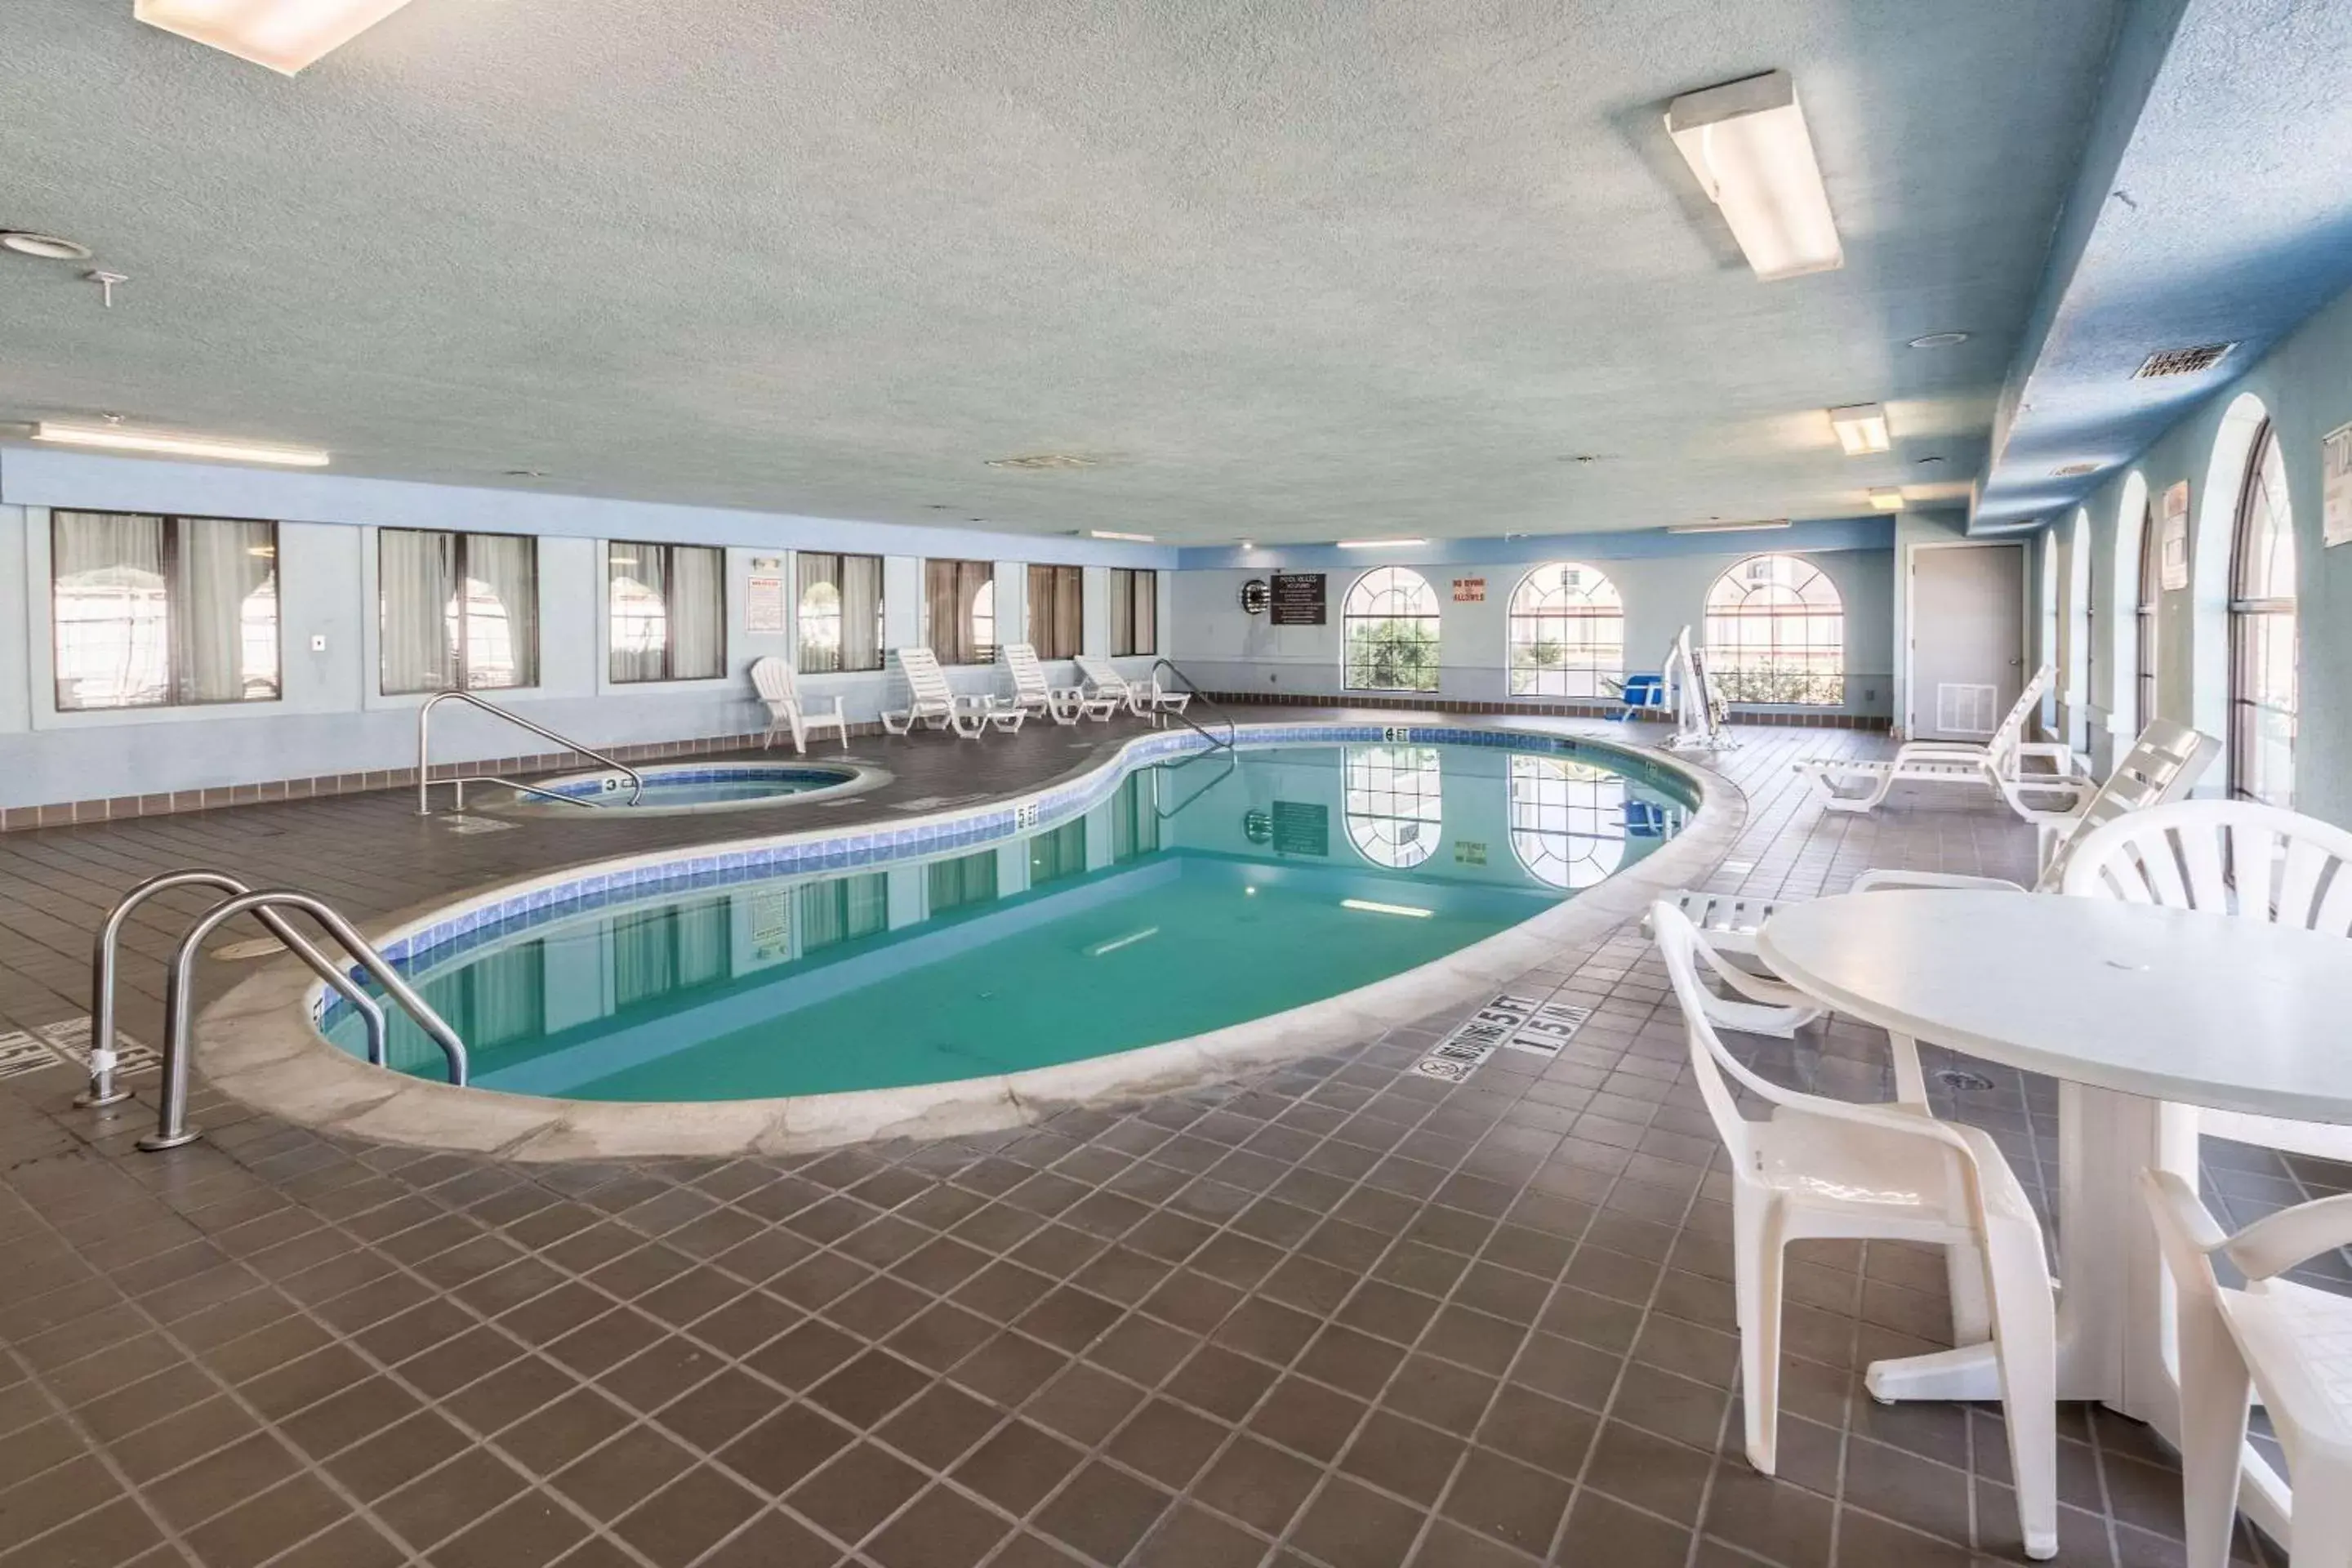 On site, Swimming Pool in Quality Suites, Ft Worth Burleson